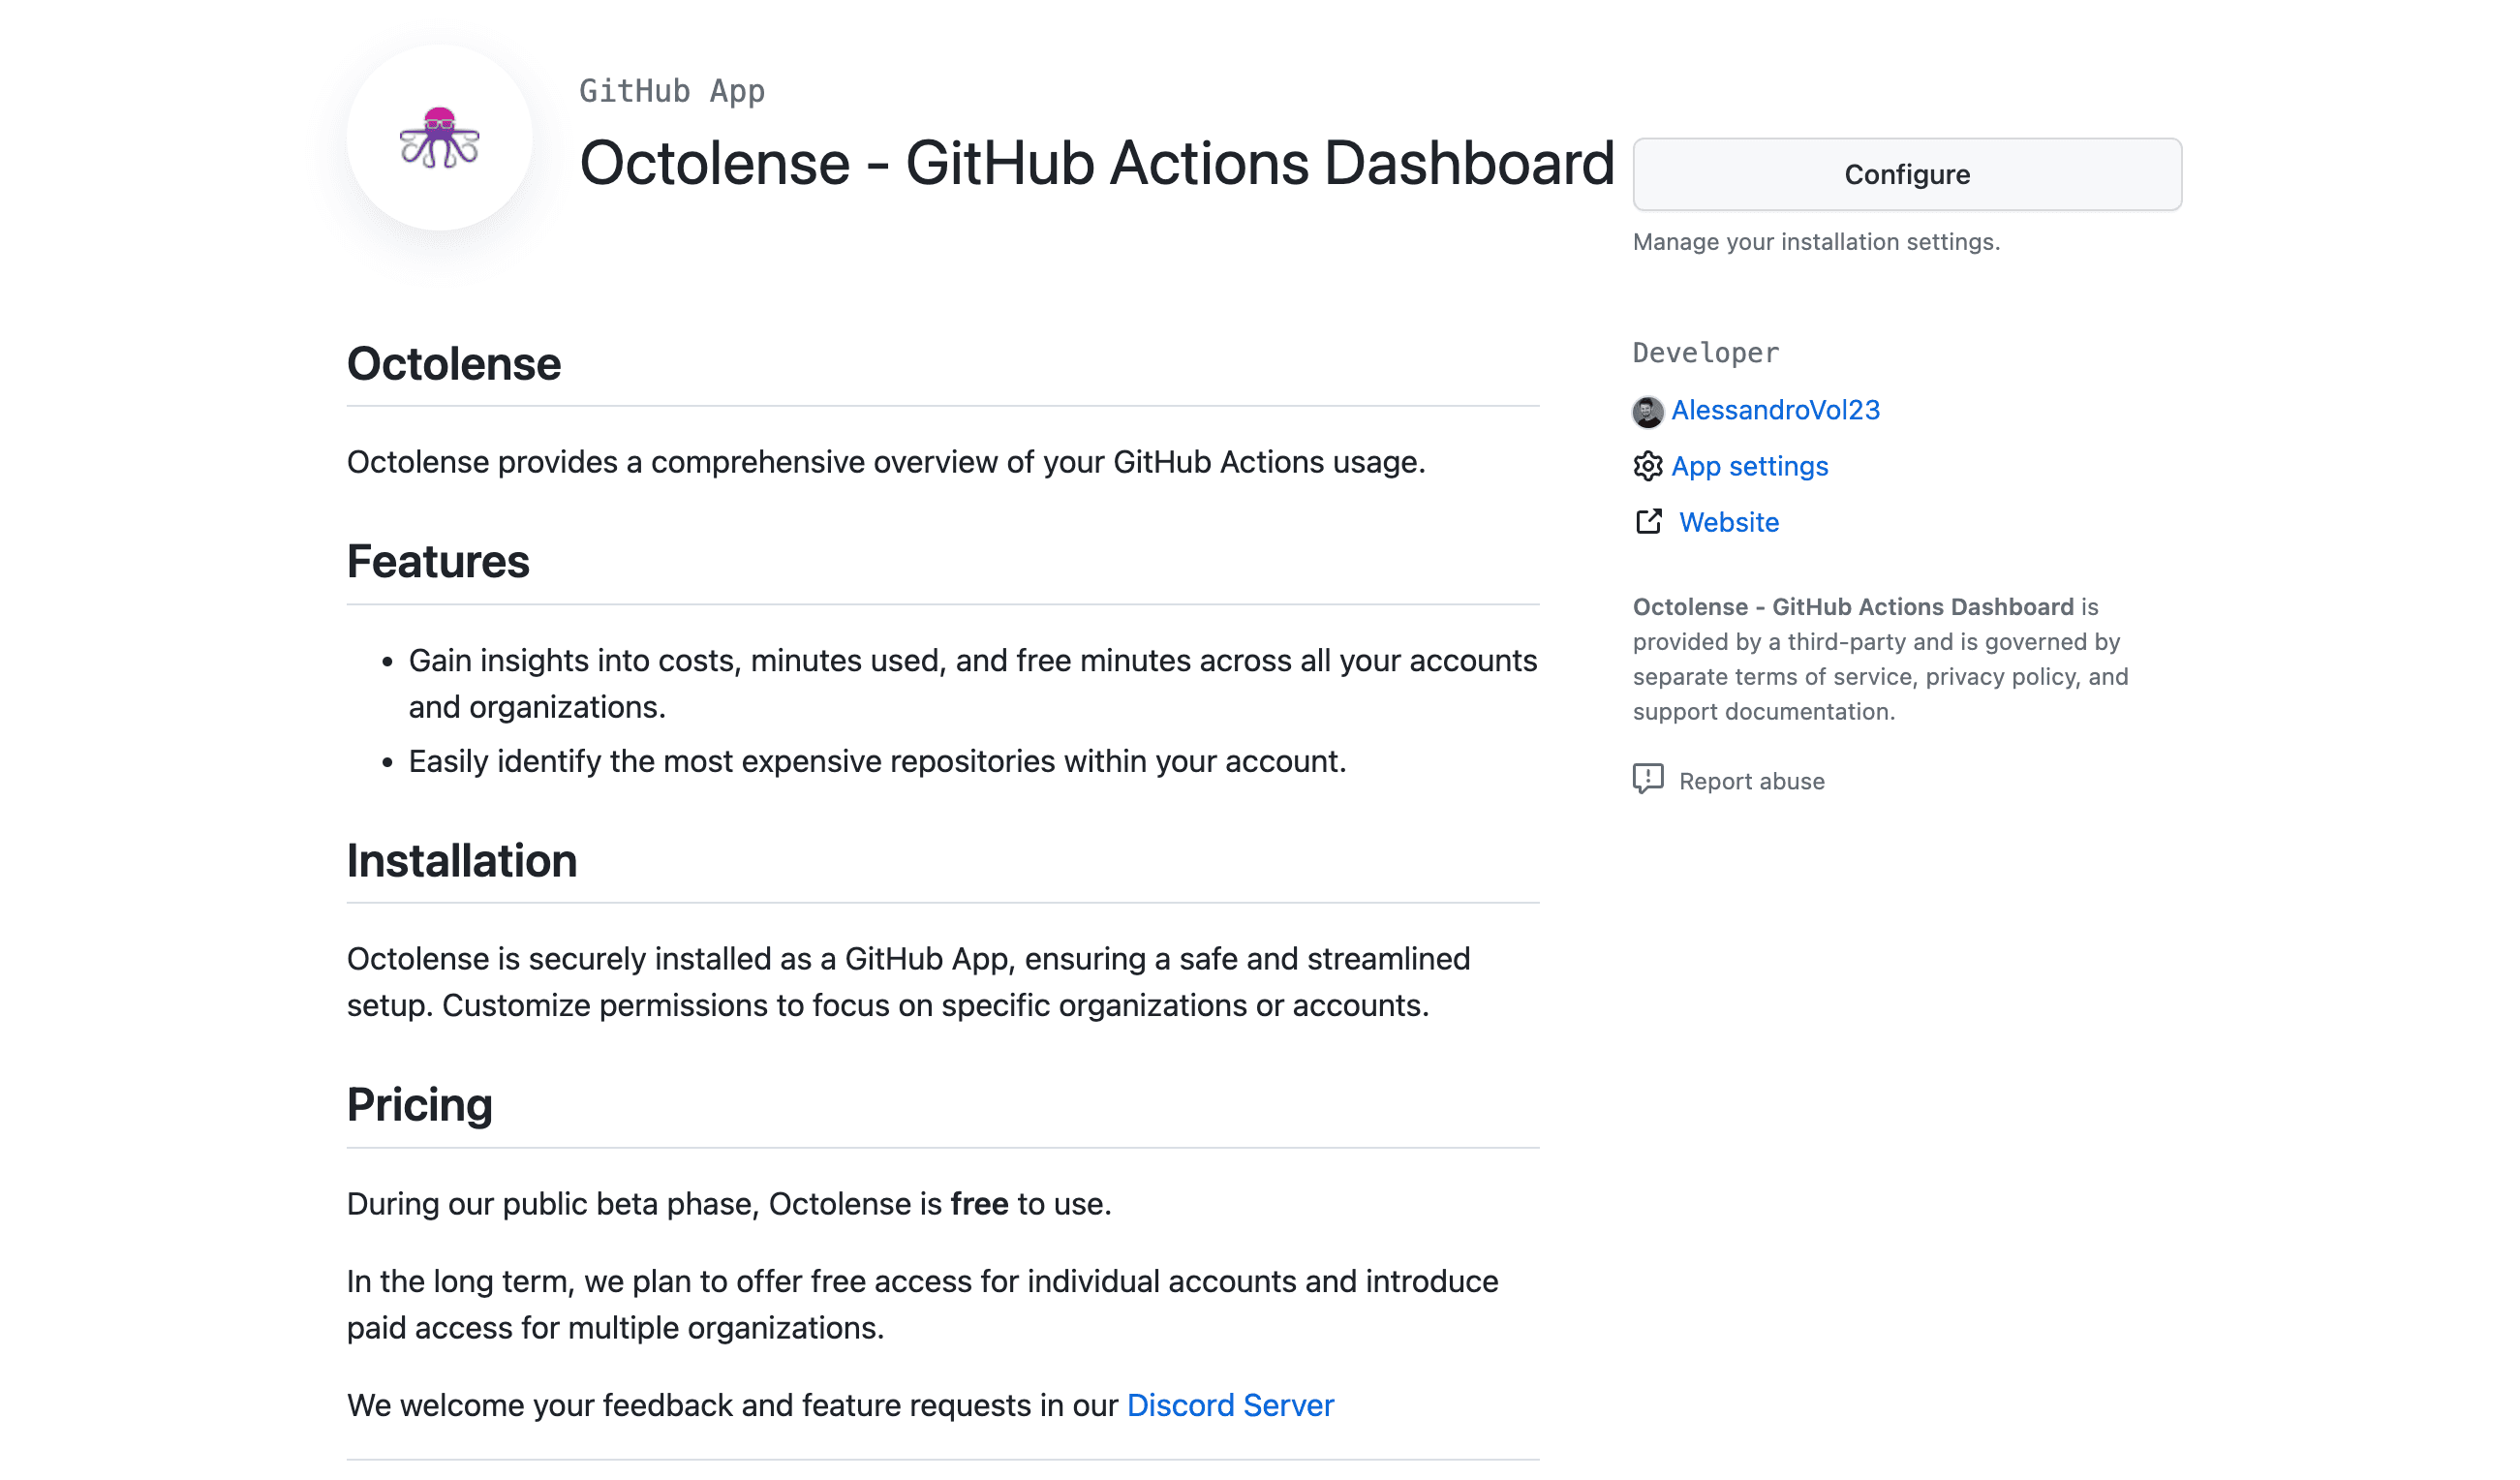 No need to change your workflows, simply install our GitHub App and get insights in seconds.